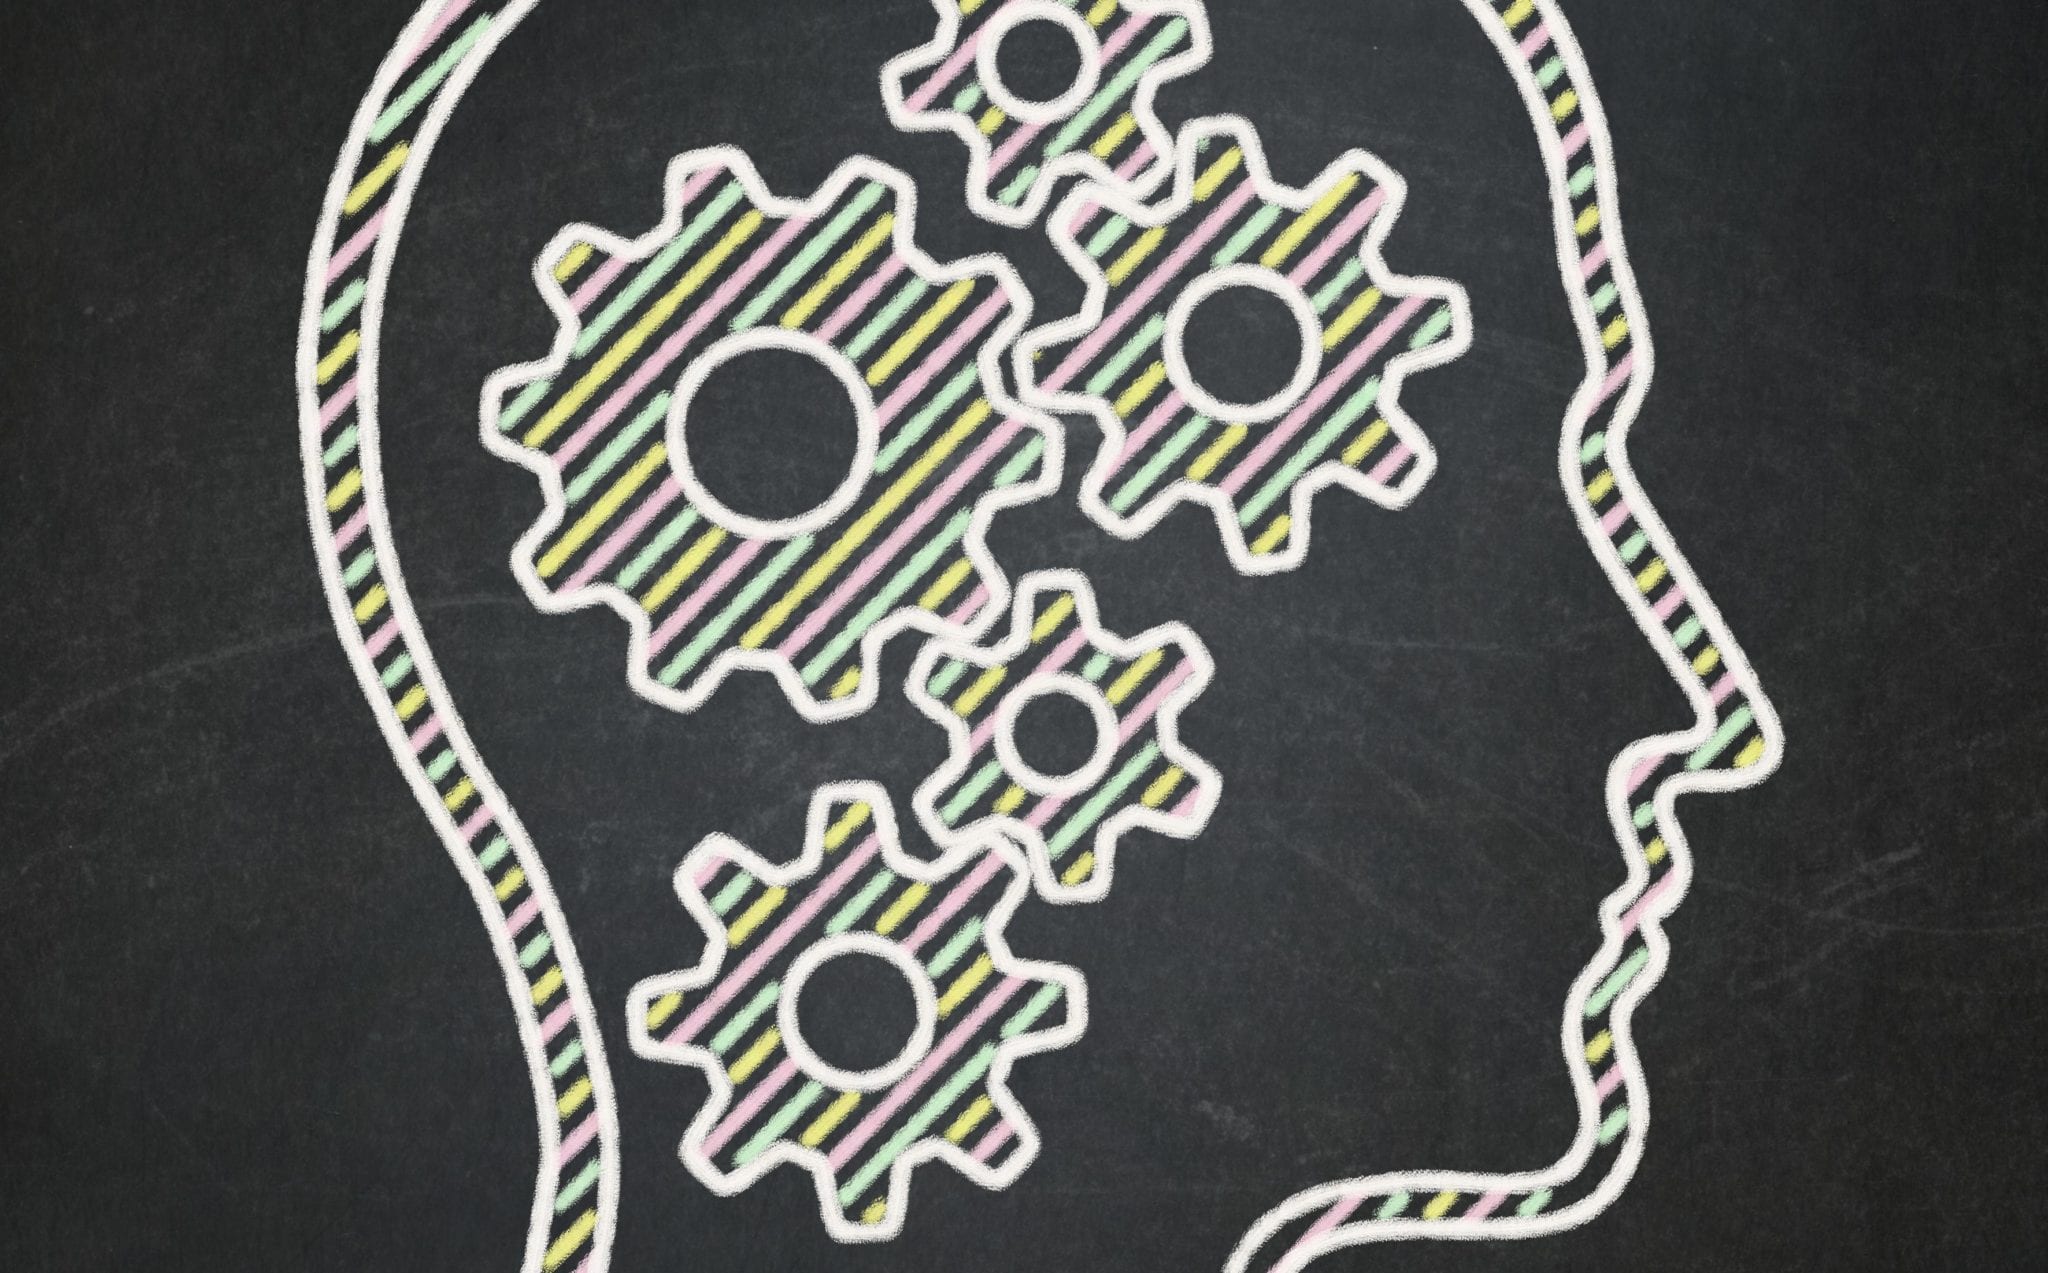 Outline of a human head in profile with several gears inside